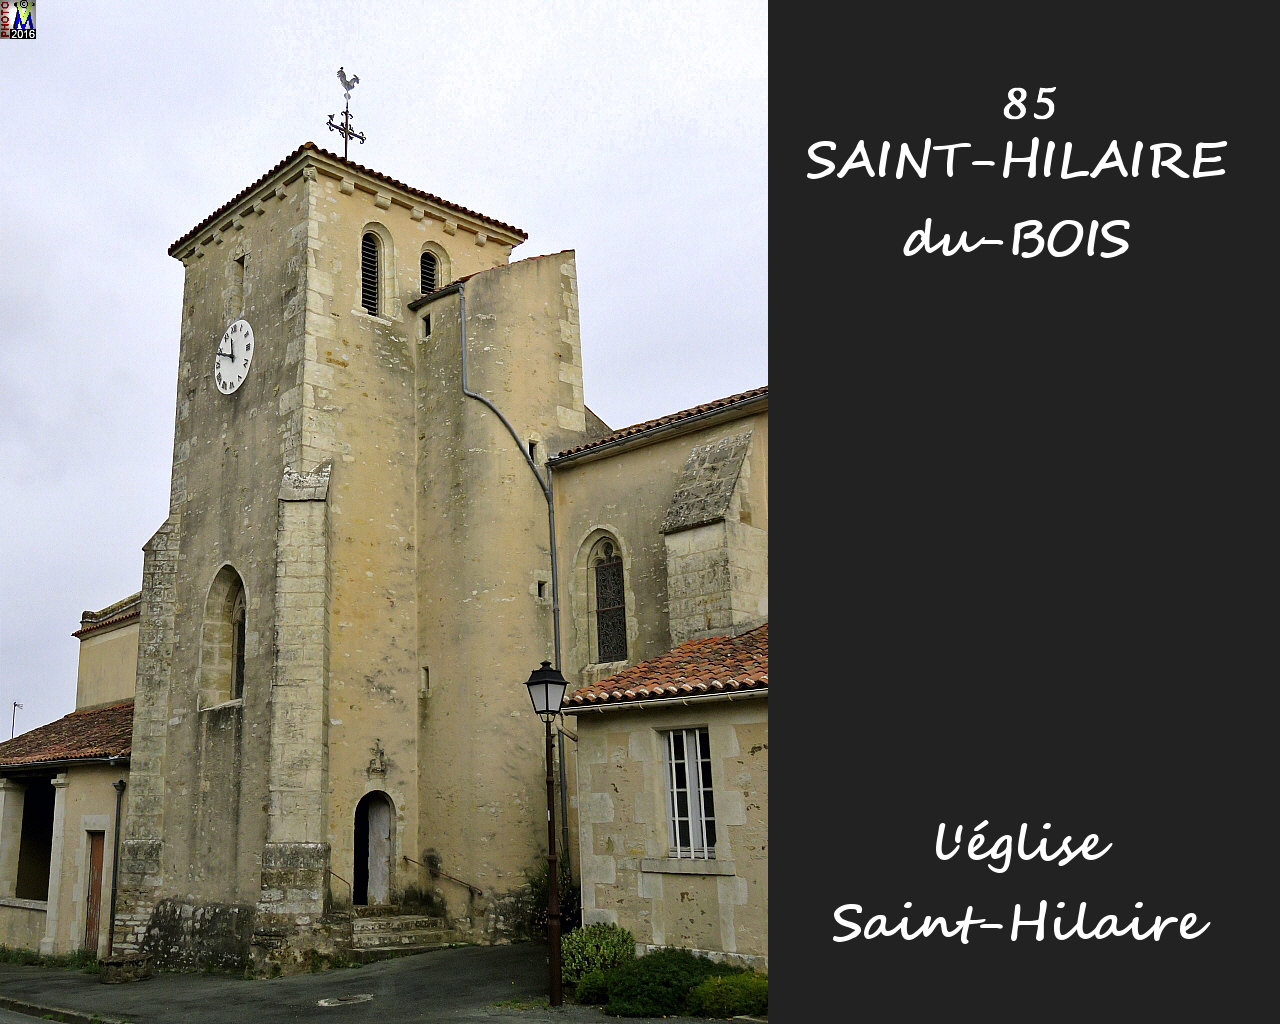 85CAILLERE-StHILAIRE-HILAIRE_eglise_1006.jpg